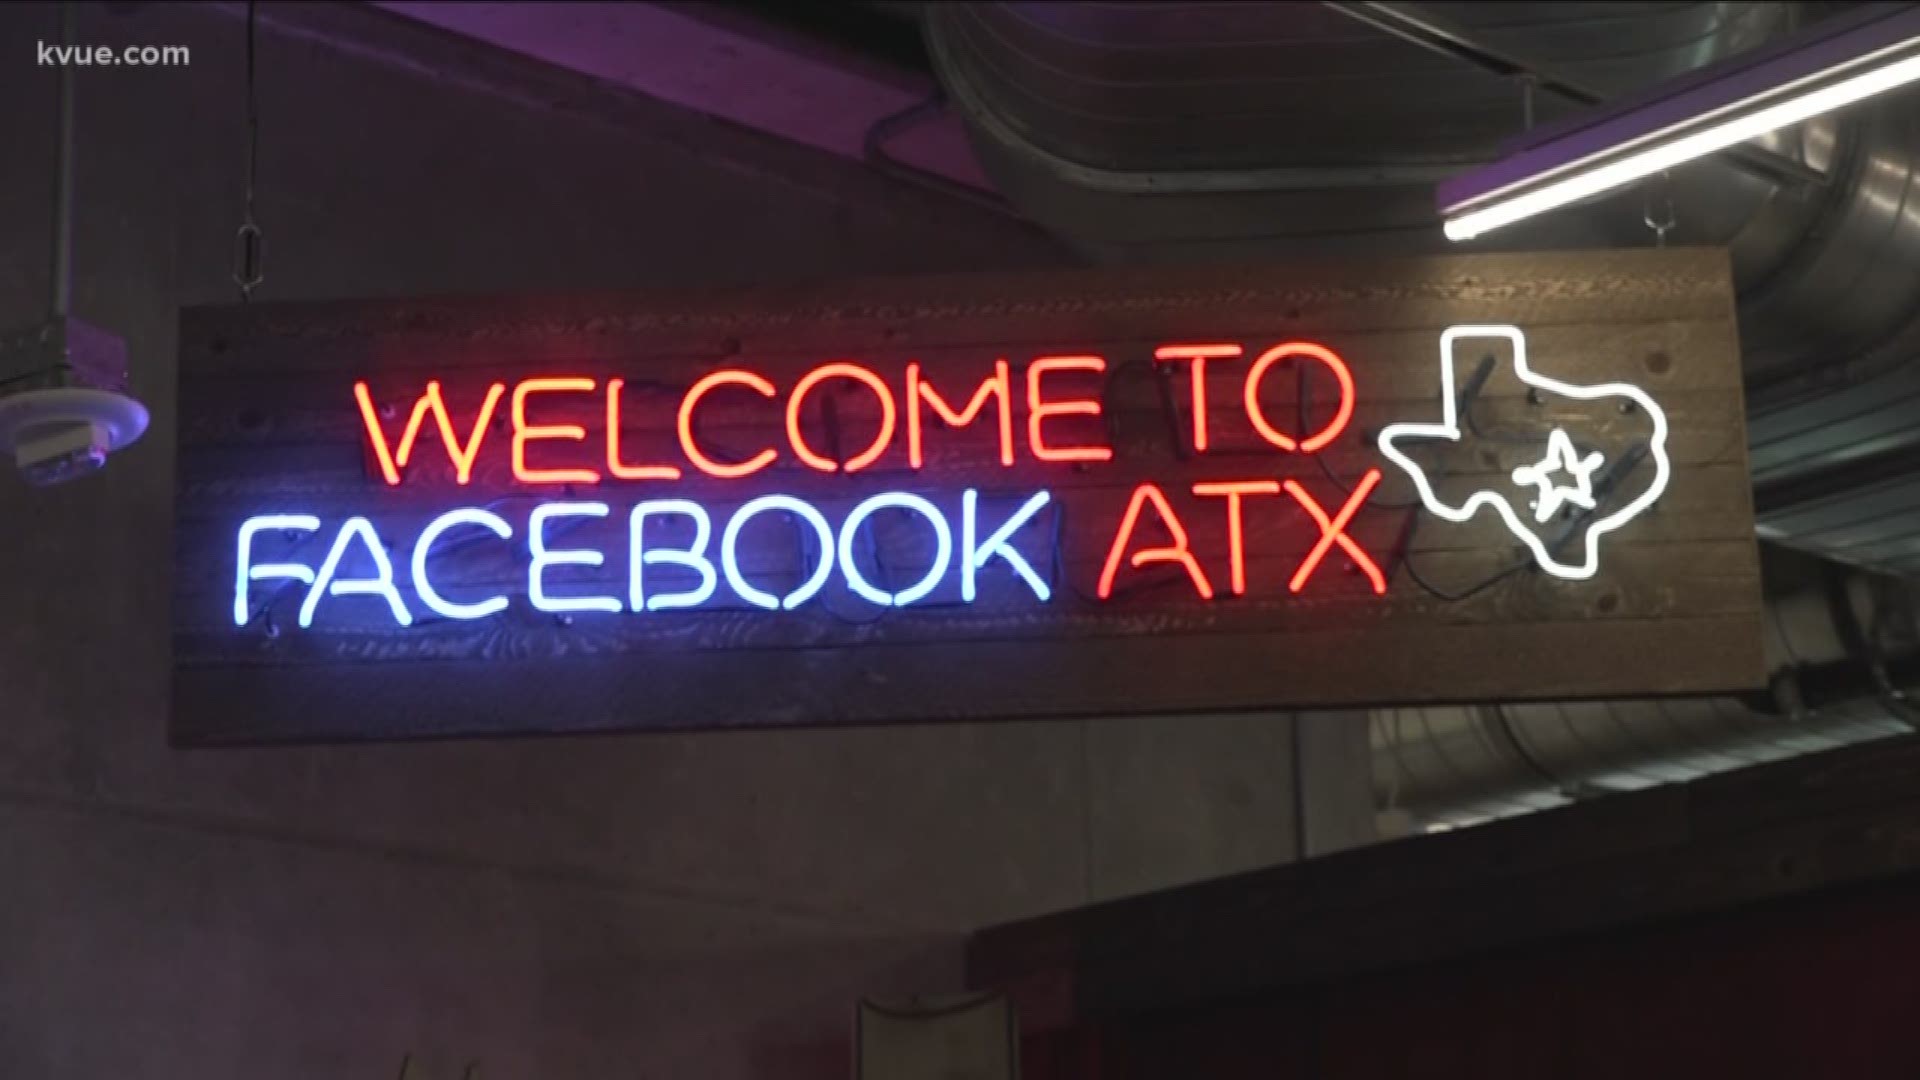 Facebook first came to Austin in 2010, with only seven employees. Now Facebook Austin is the company's fourth-largest office with more than 1,200 employees.